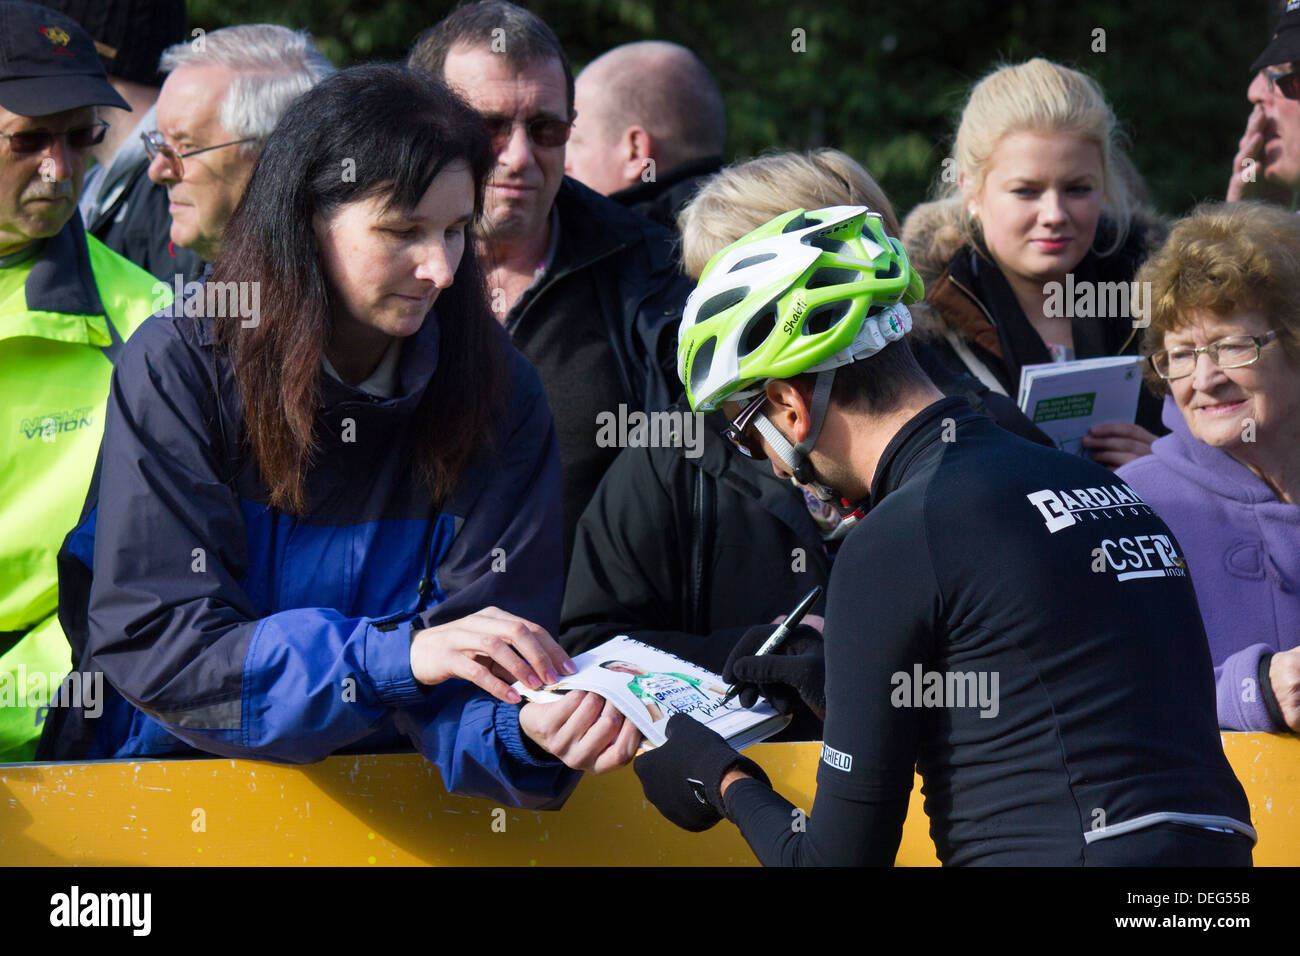 Tour of Britain cyclist signing autograph Stock Photo